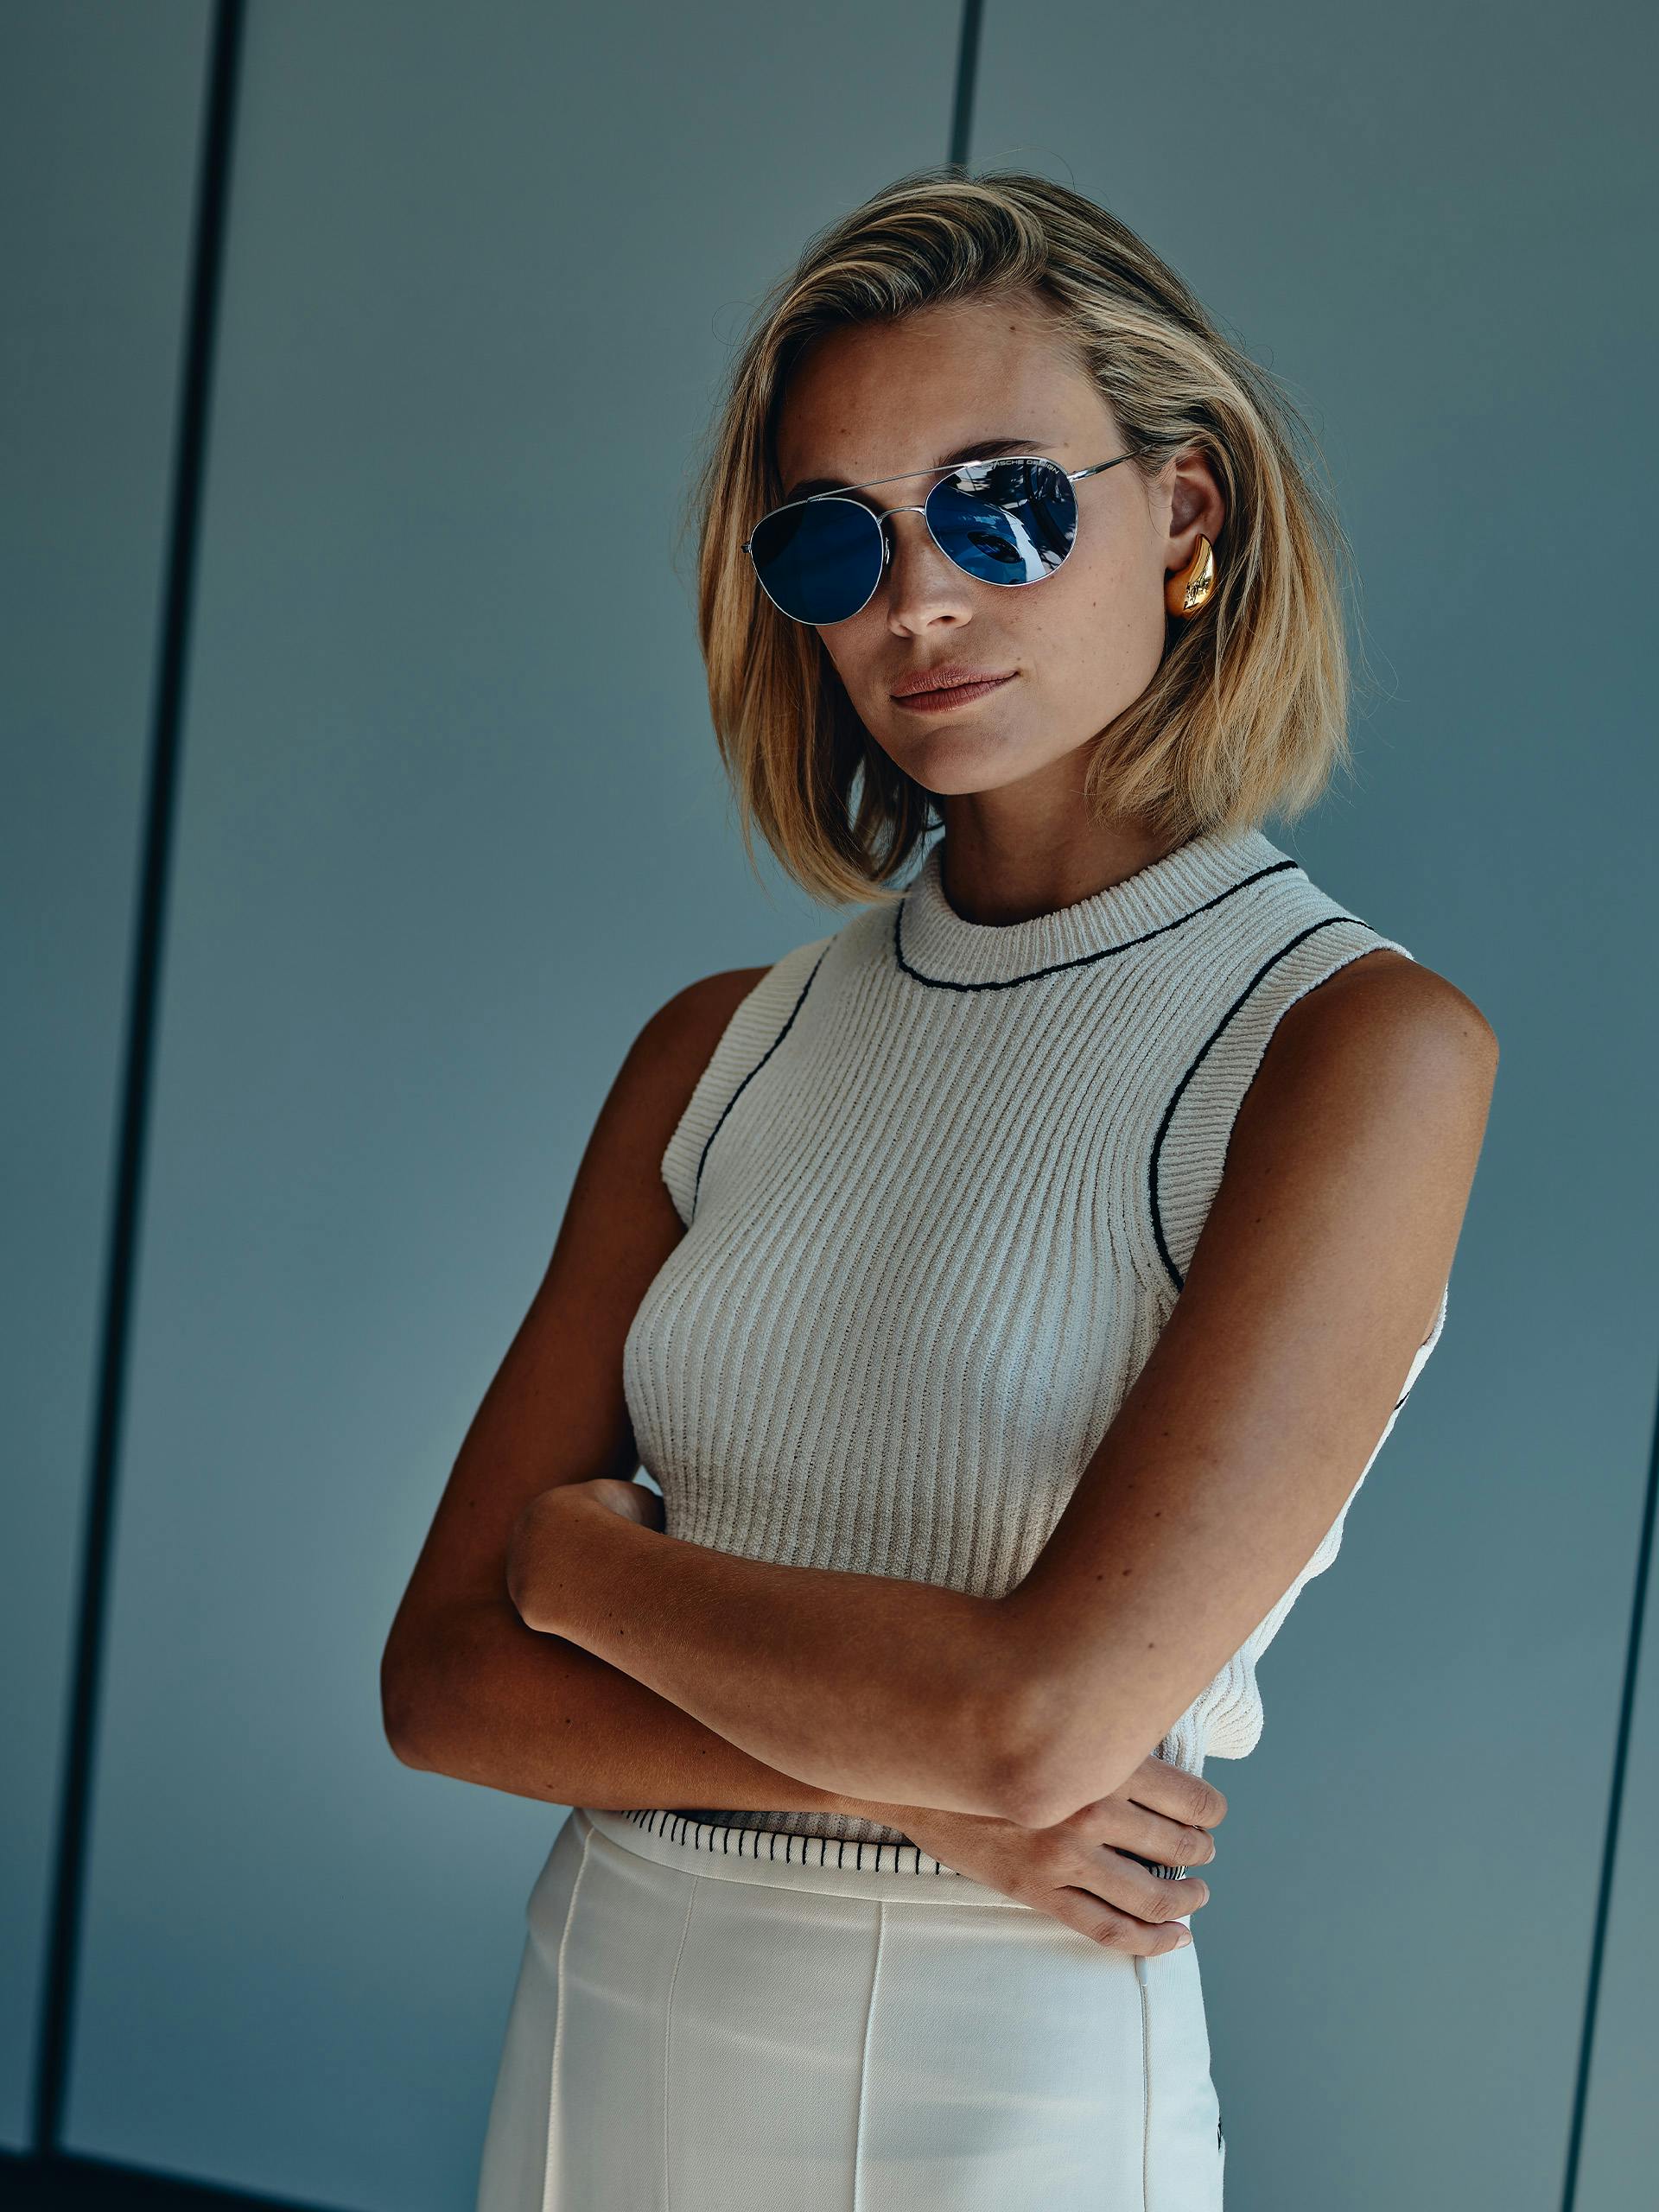 Pictured frontally is a blonde young woman wearing sunglasses